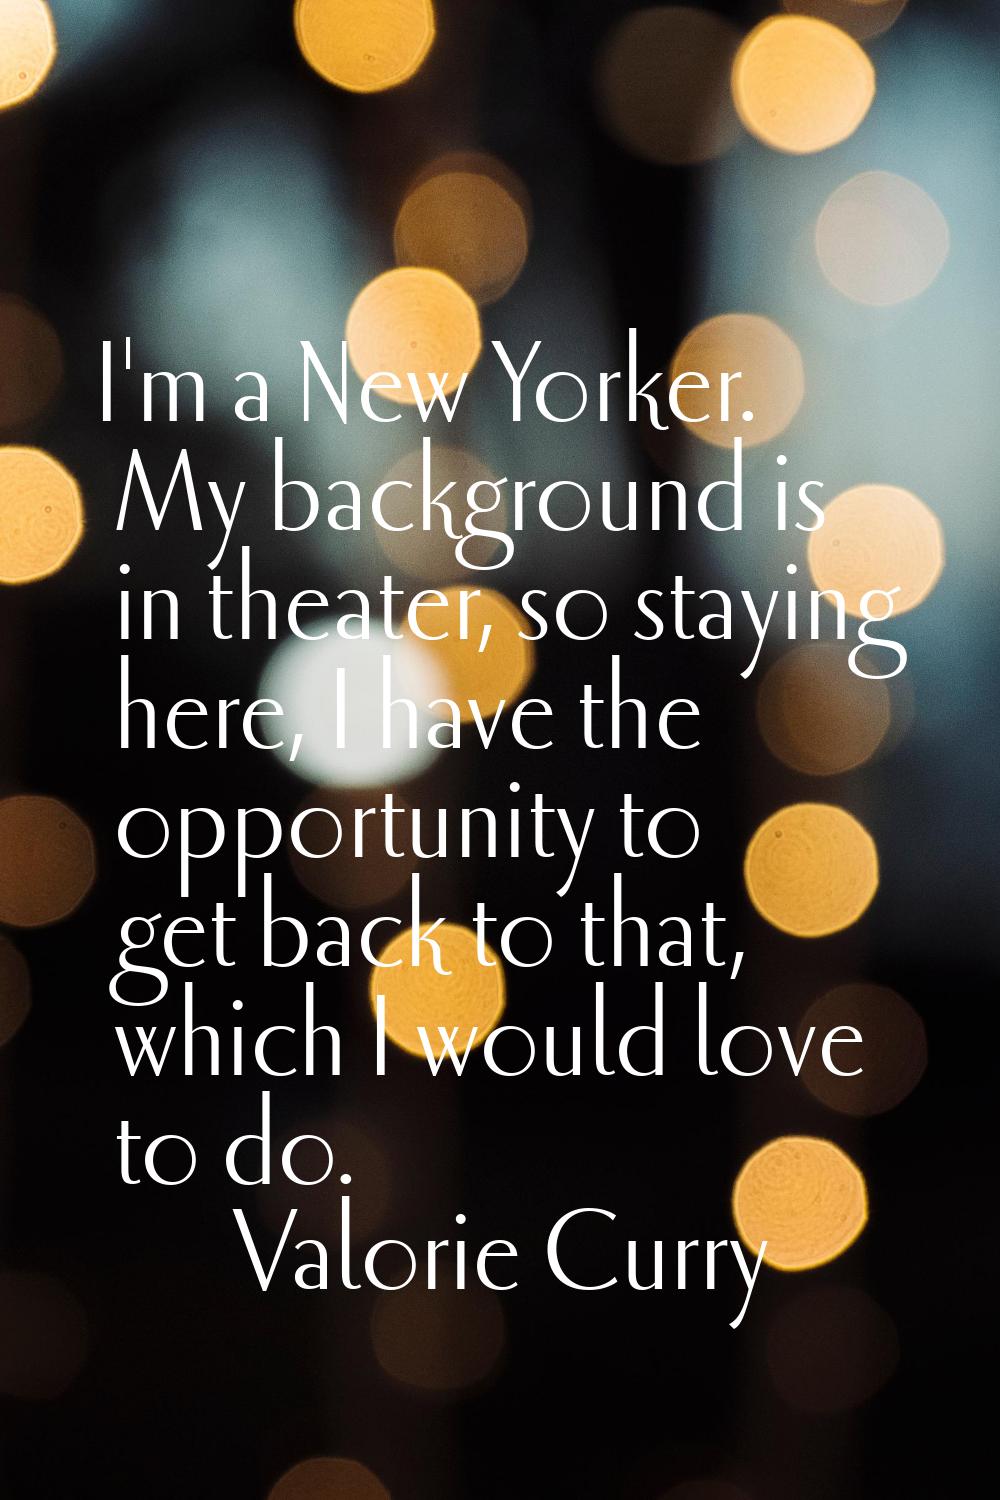 I'm a New Yorker. My background is in theater, so staying here, I have the opportunity to get back 